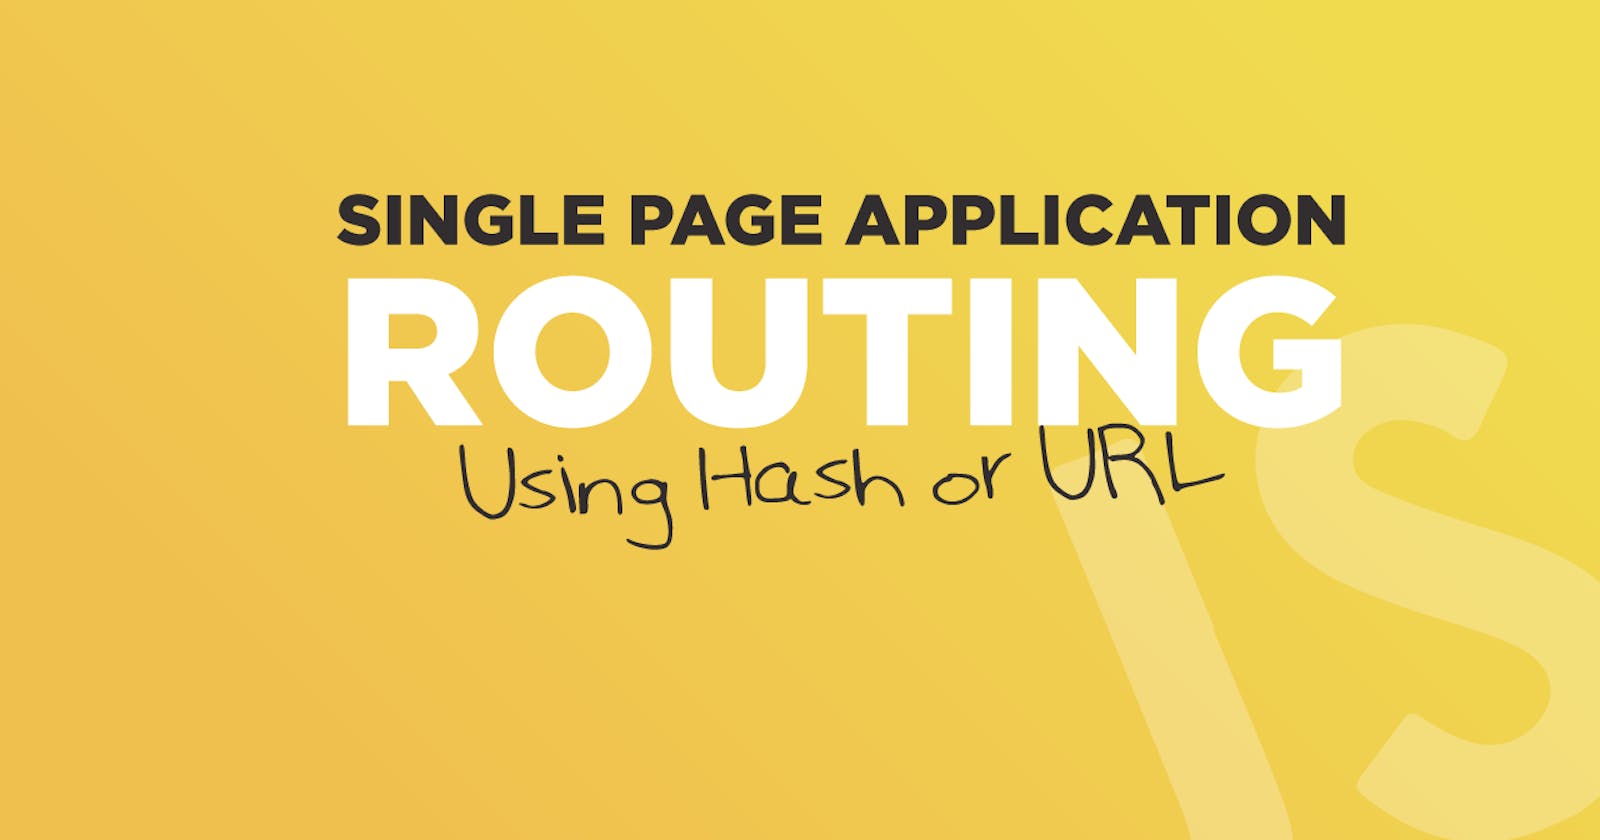 Single Page Application Routing Using Hash or URL